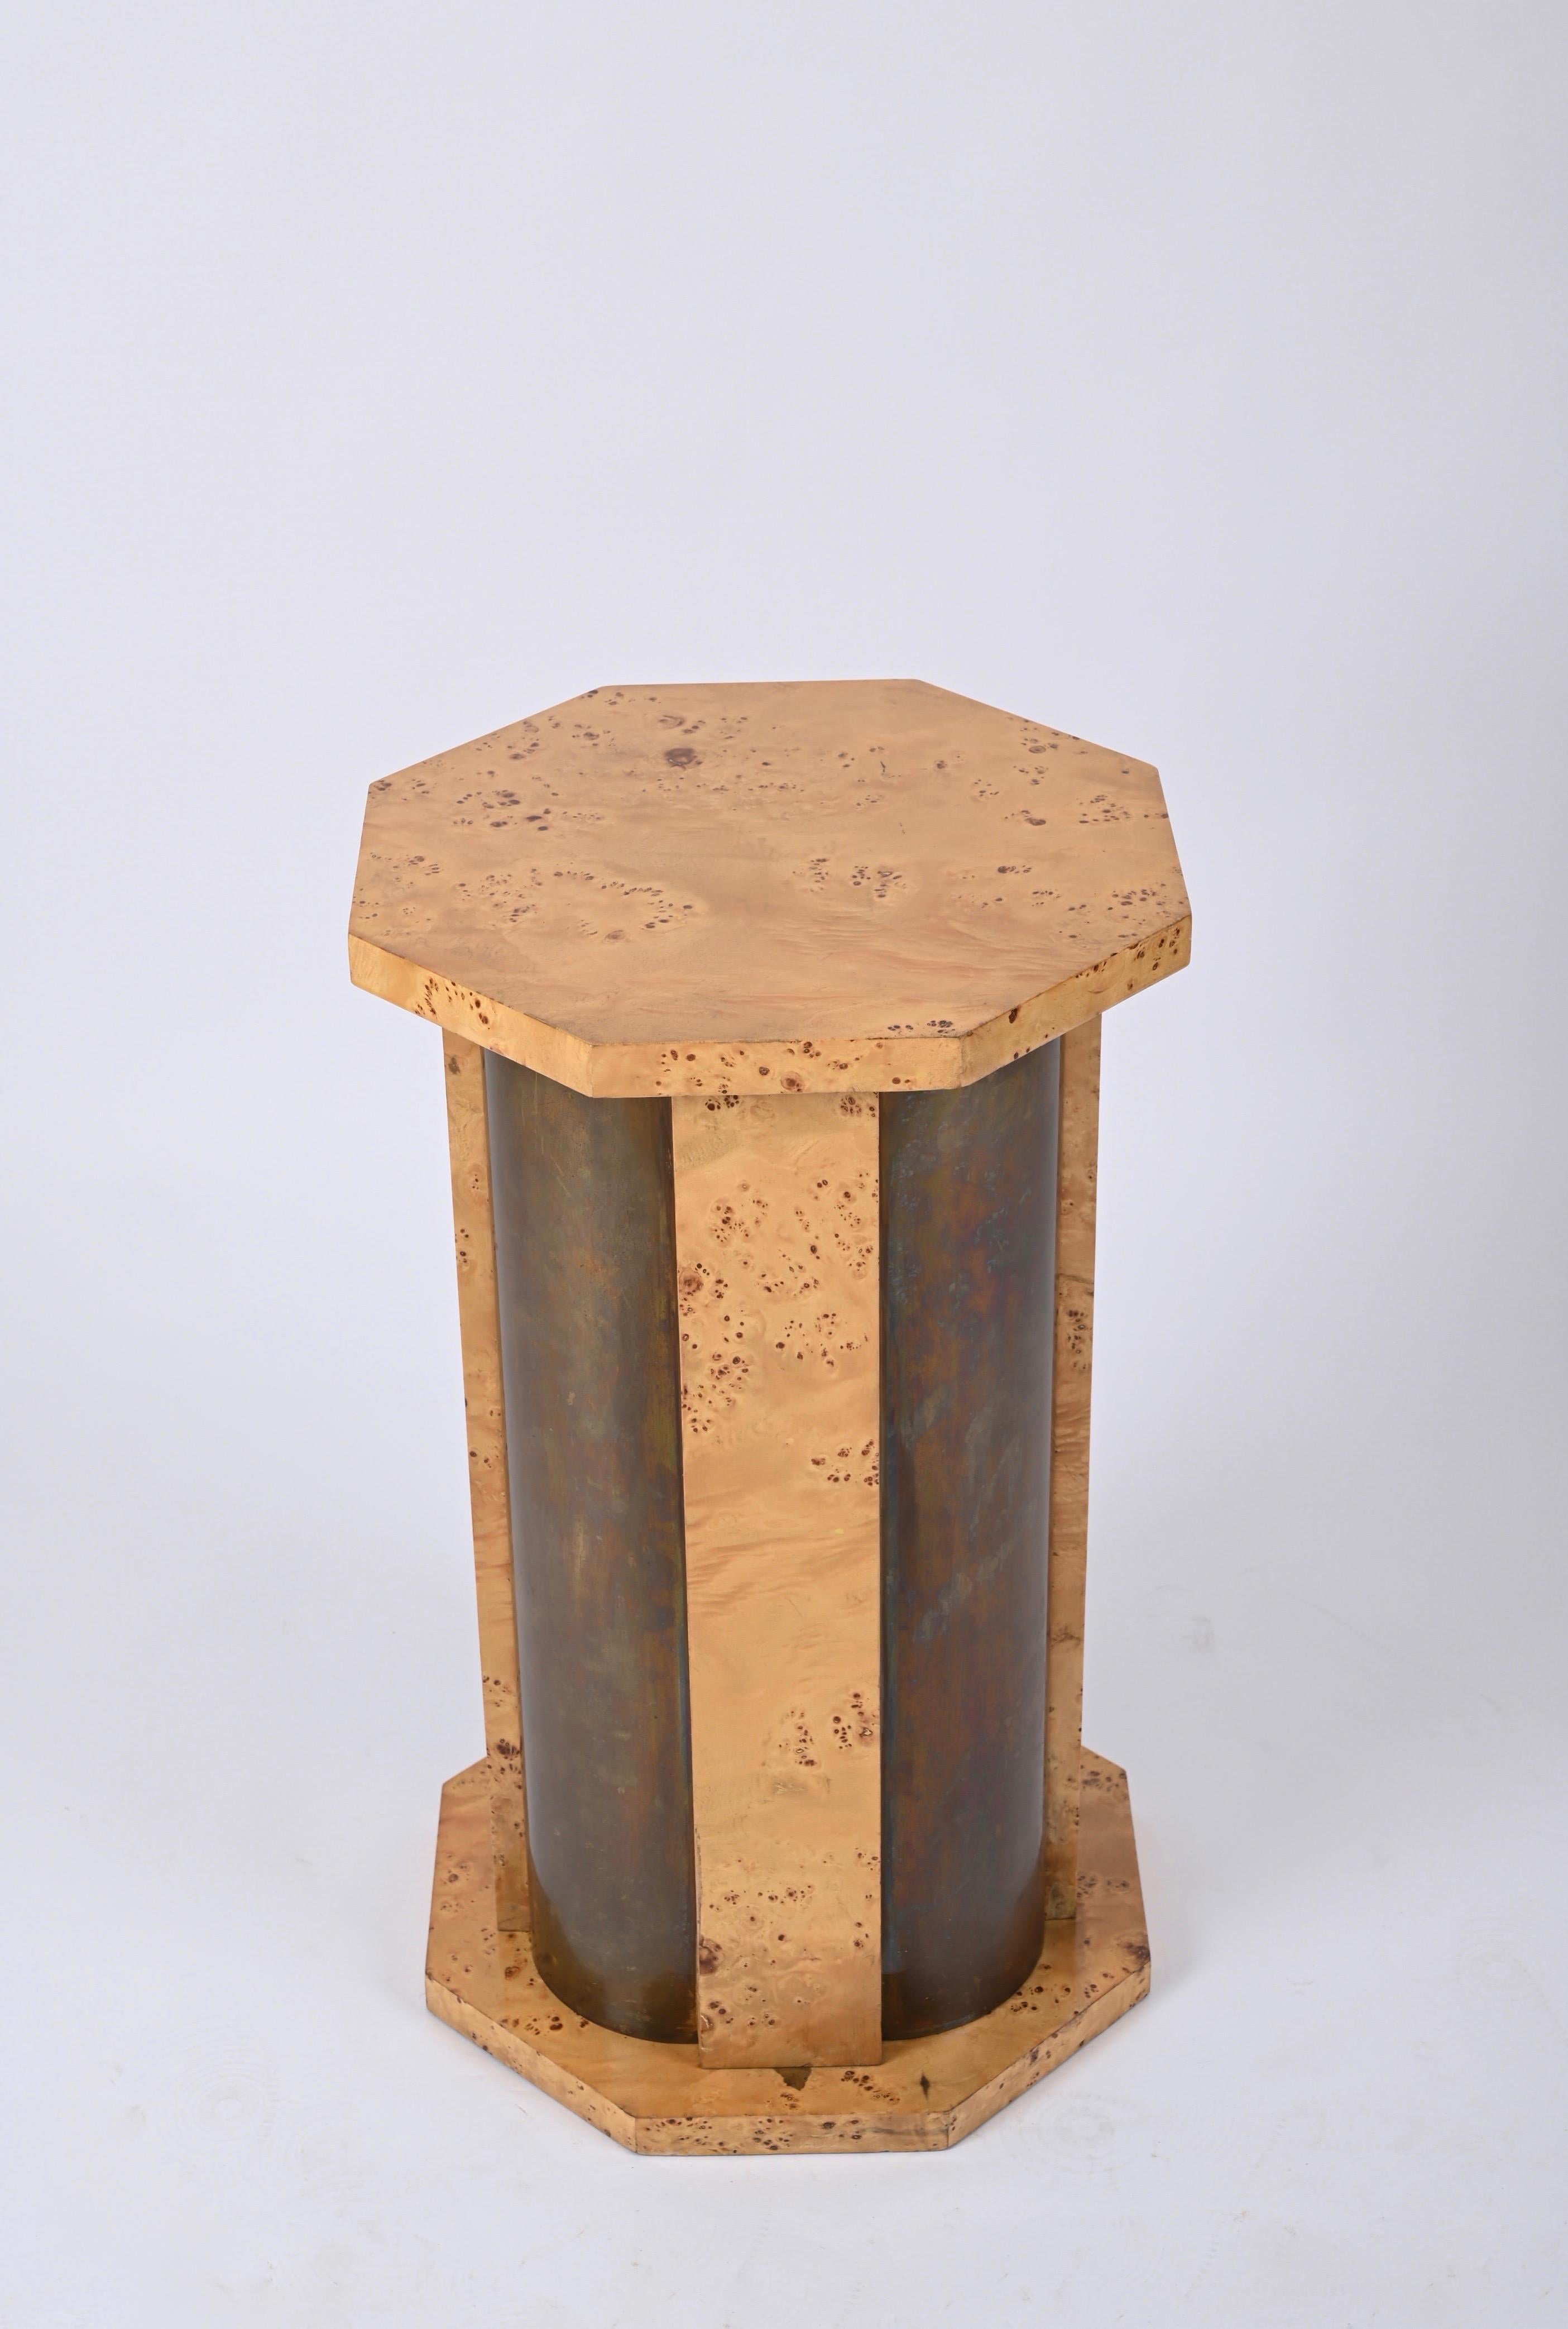 Italian Tommaso Barbi Octagonal Table Pedestal in Burl Wood and Brass, Italy, 1970 For Sale